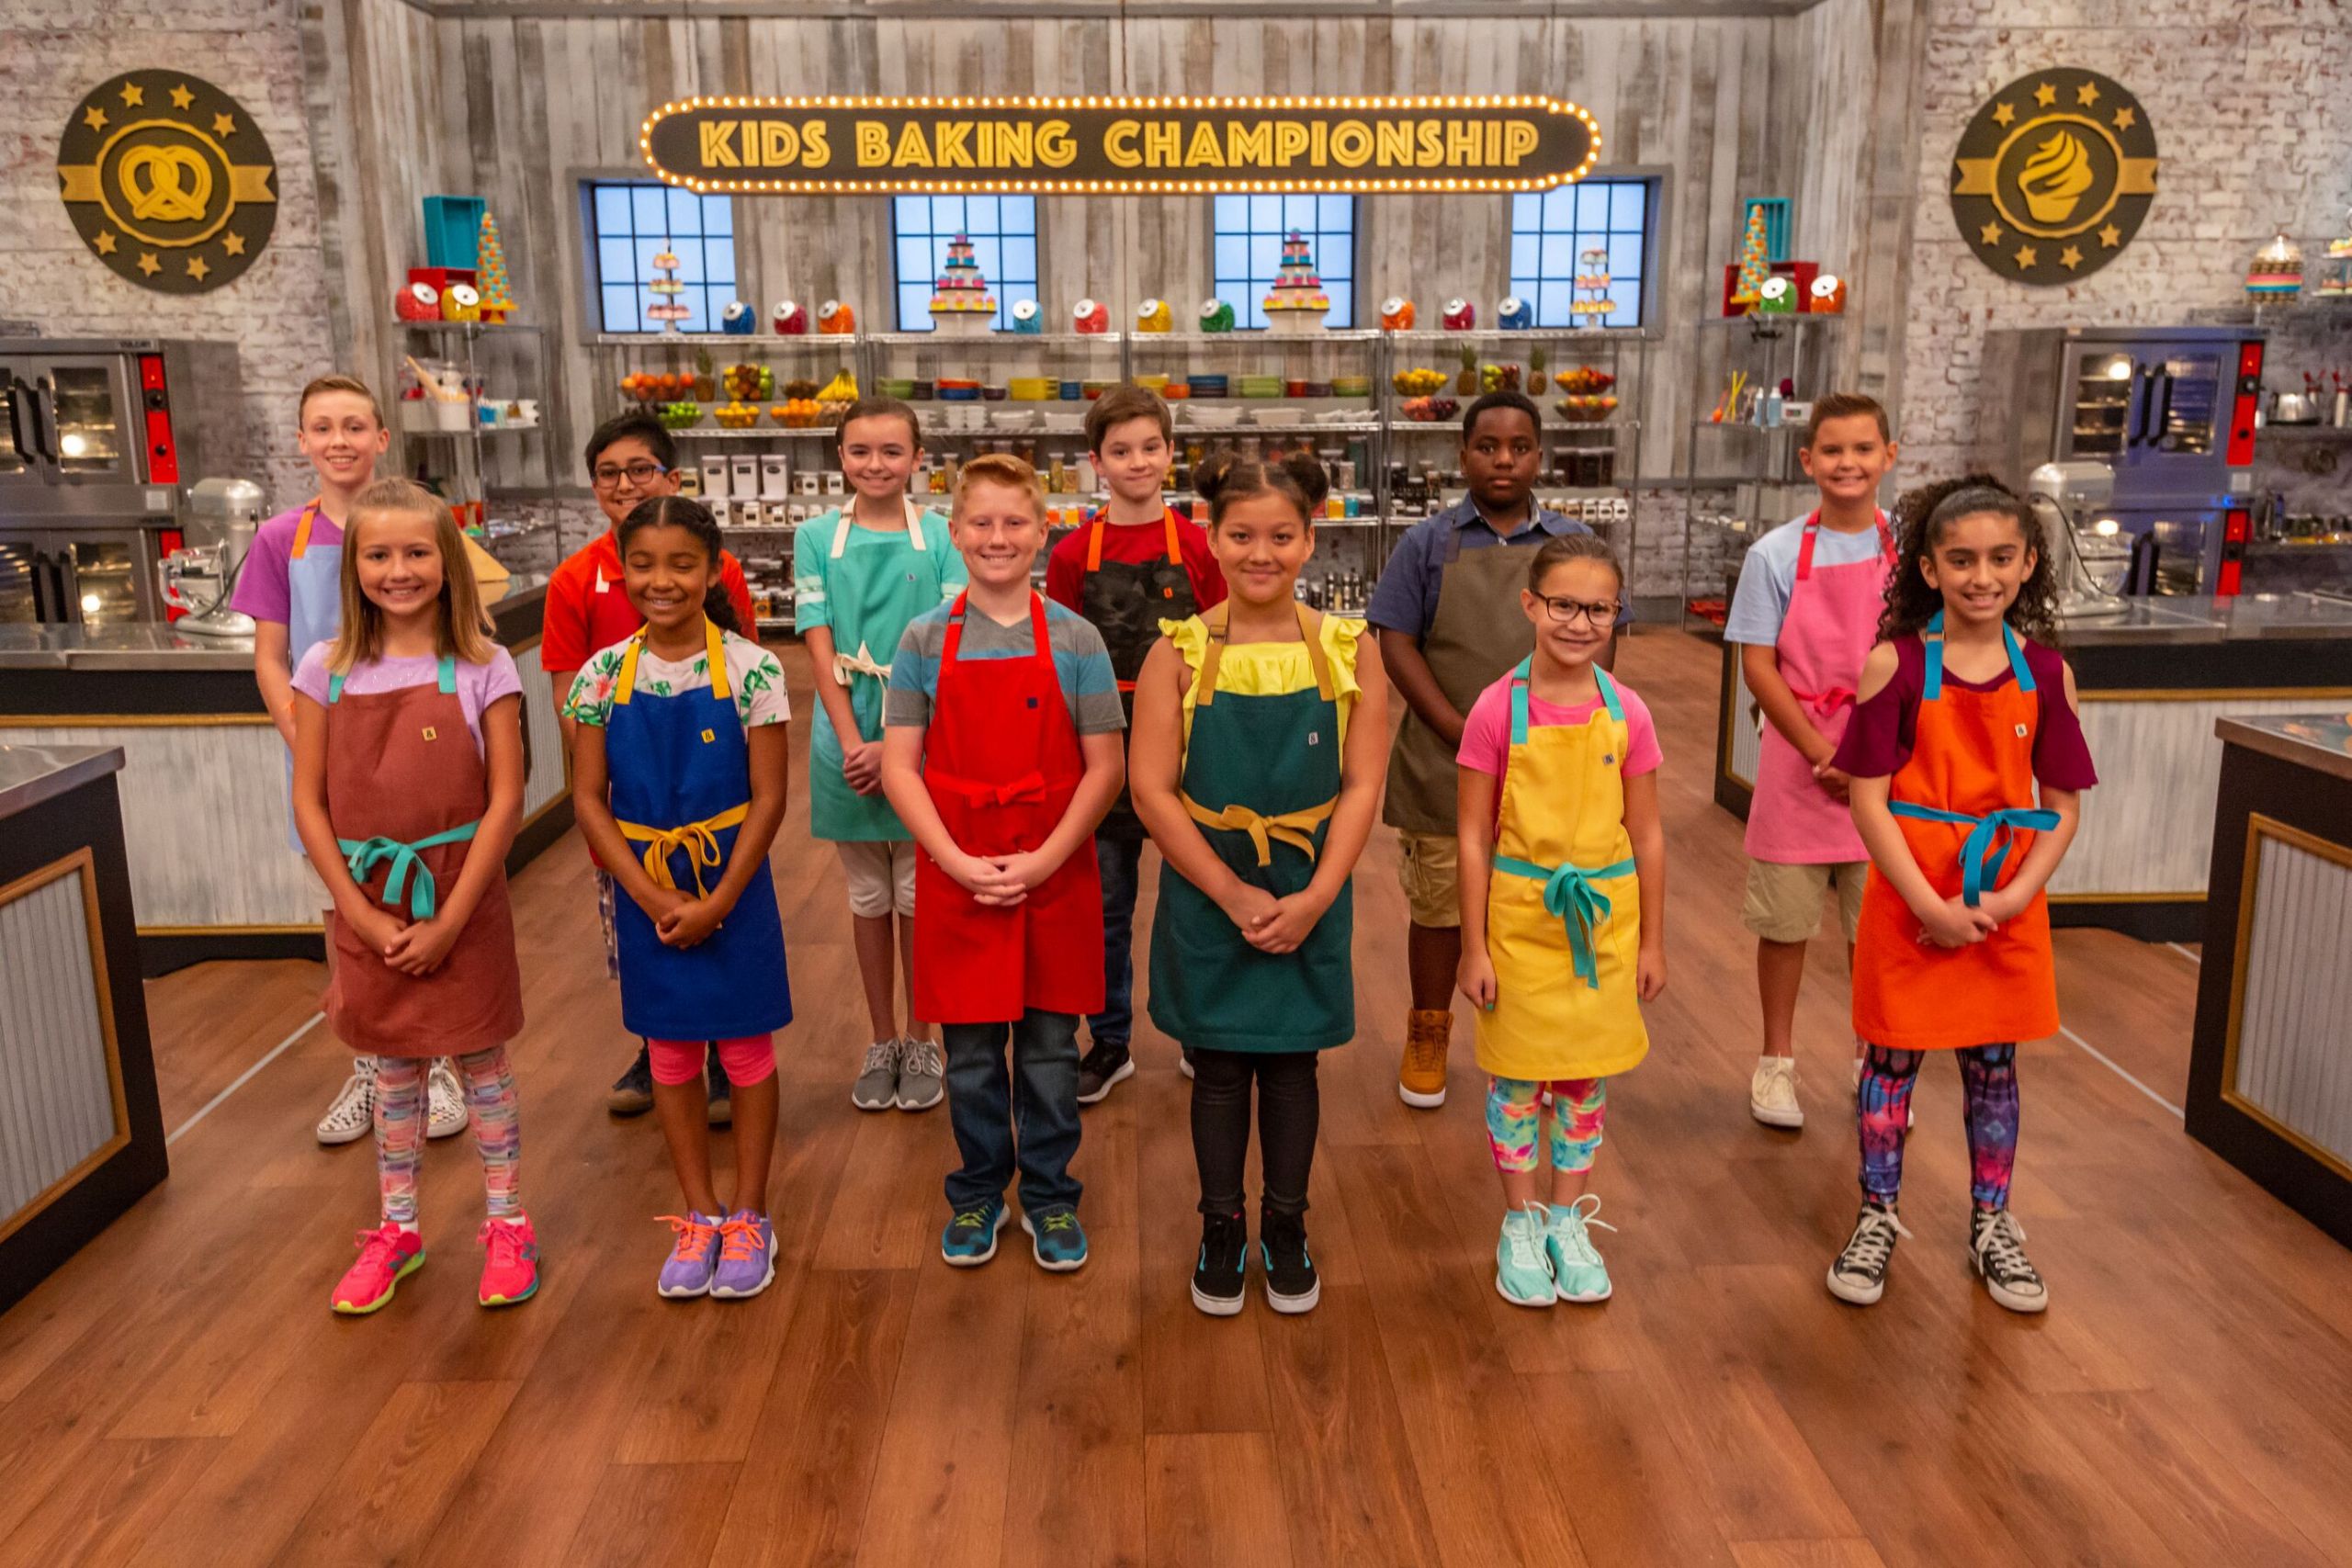 Kids Baking Championship Recipes
 Kids Baking Championship contestants share their best and